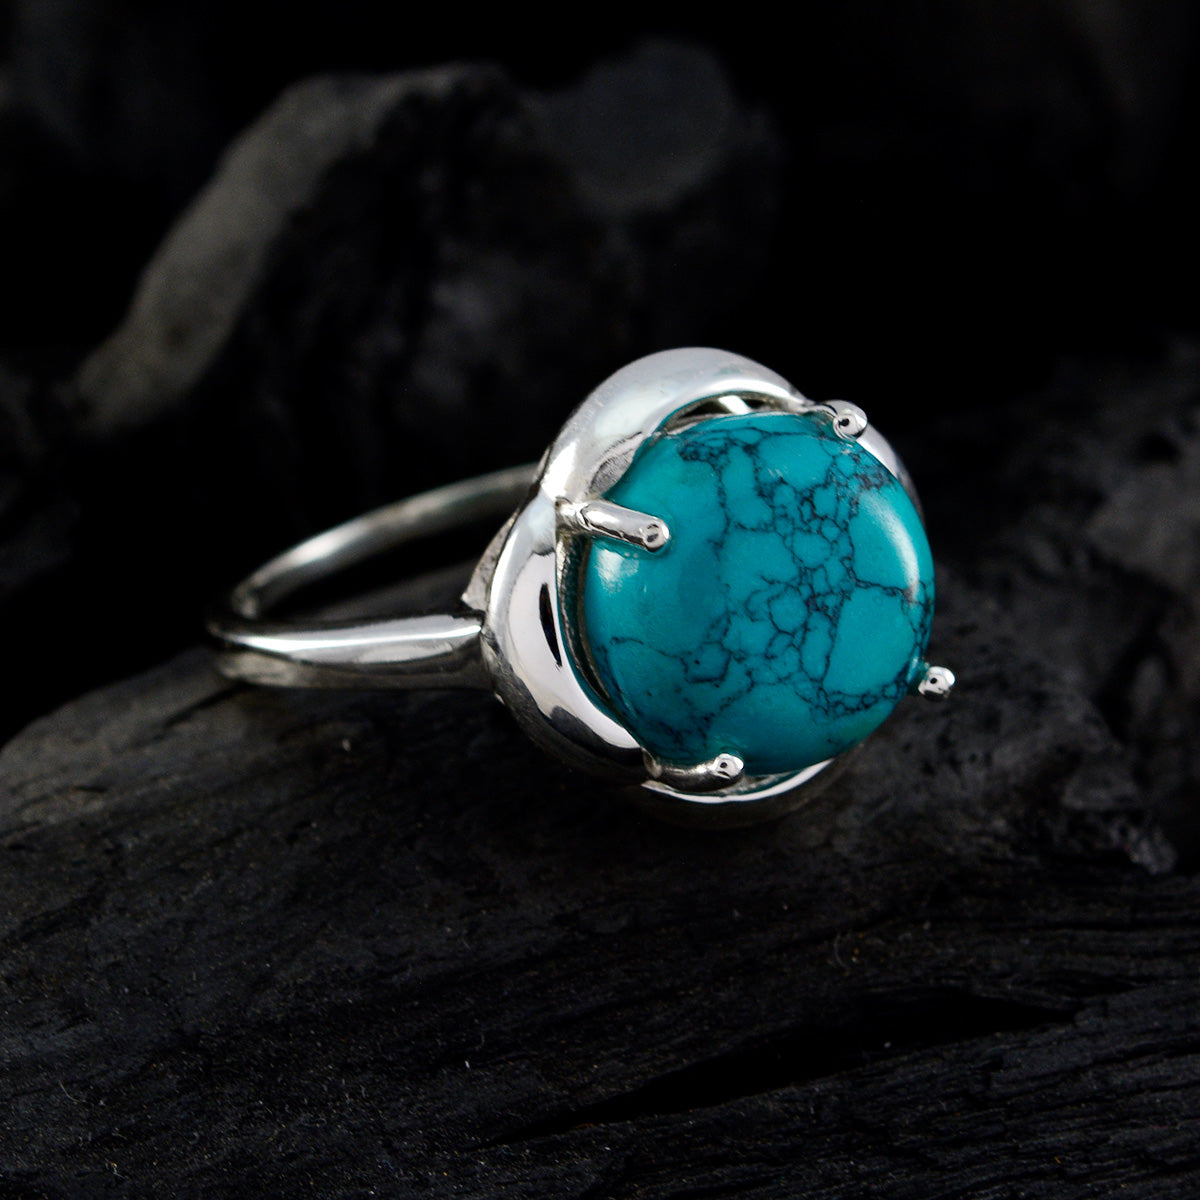 Riyo Pretty Gems Turquoise Sterling Silver Ring Personalized Gift